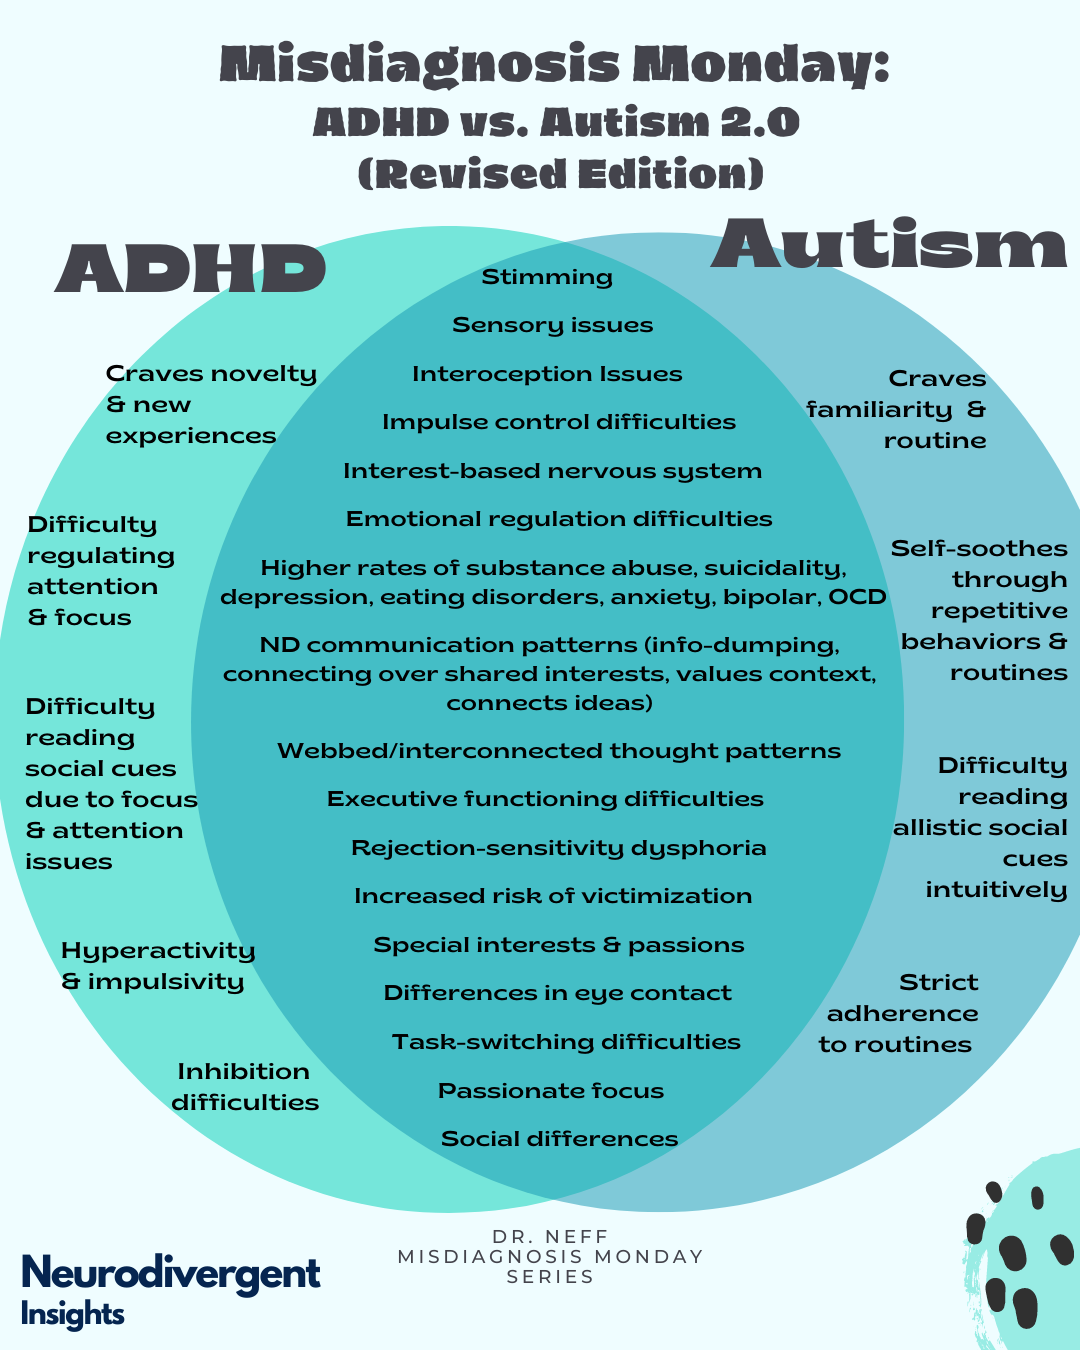 Can Adhd Be Mistaken for Autism?